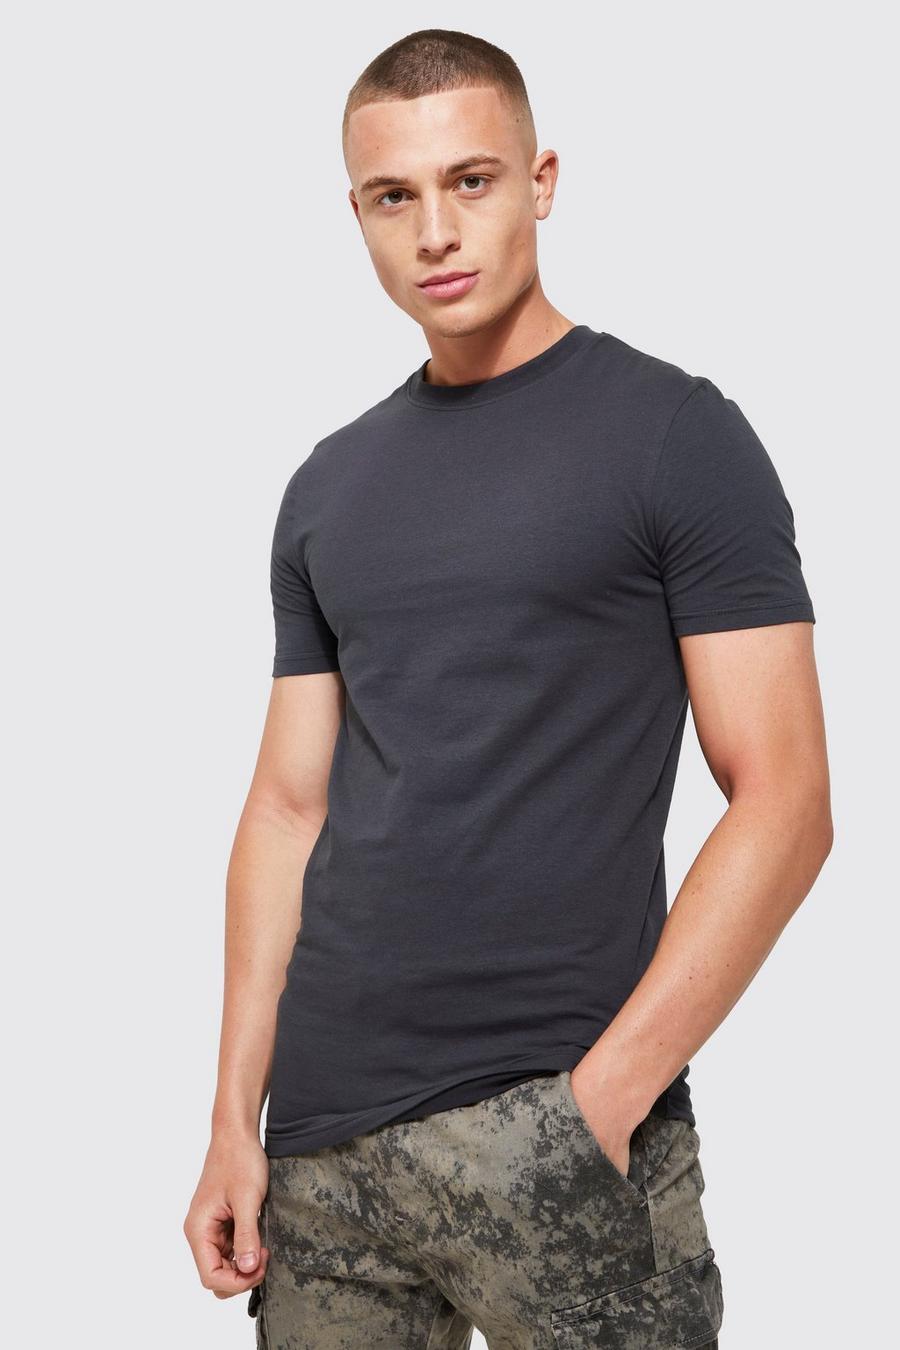 Charcoal grey Longline Muscle Fit T-Shirt